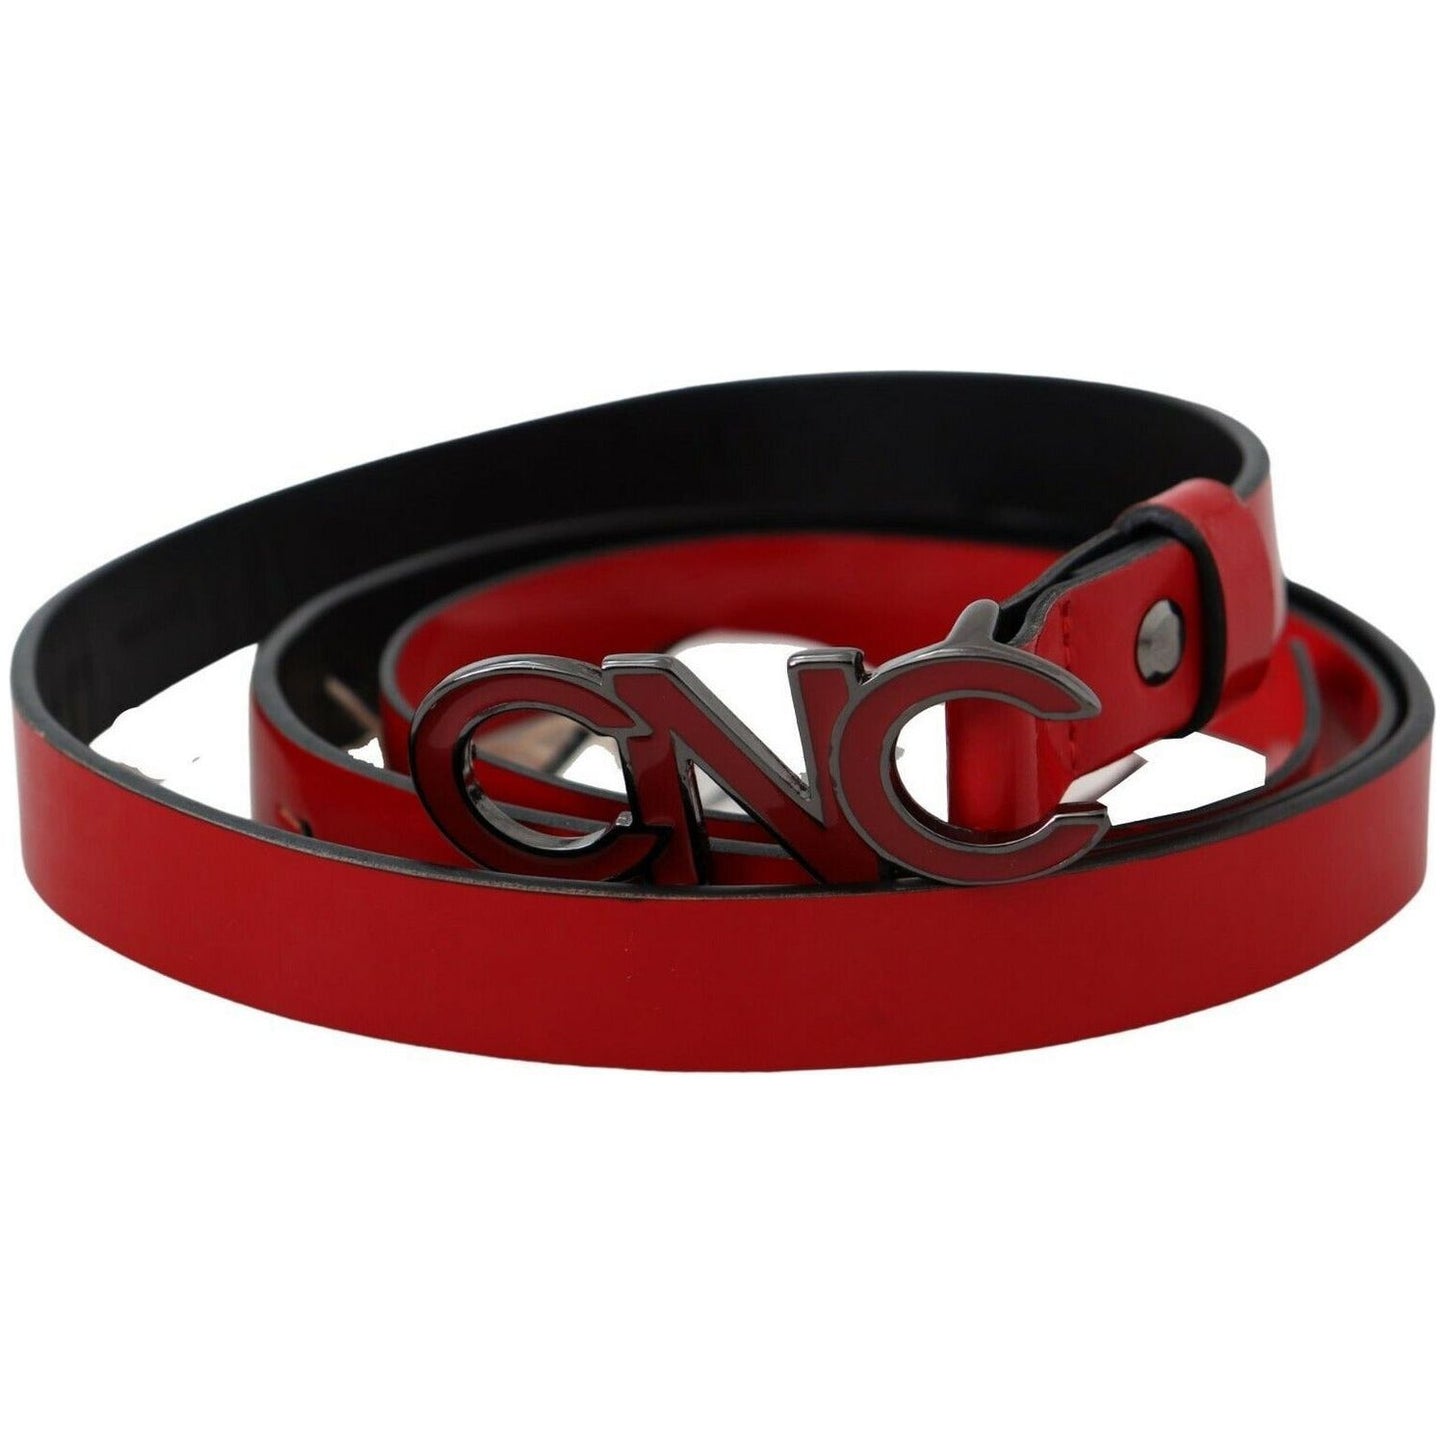 Costume National Chic Red Leather Waist Belt with Black-Tone Buckle WOMAN BELTS red-black-reversible-leather-logo-buckle-belt s-l1600-100-57e98c6a-514.jpg